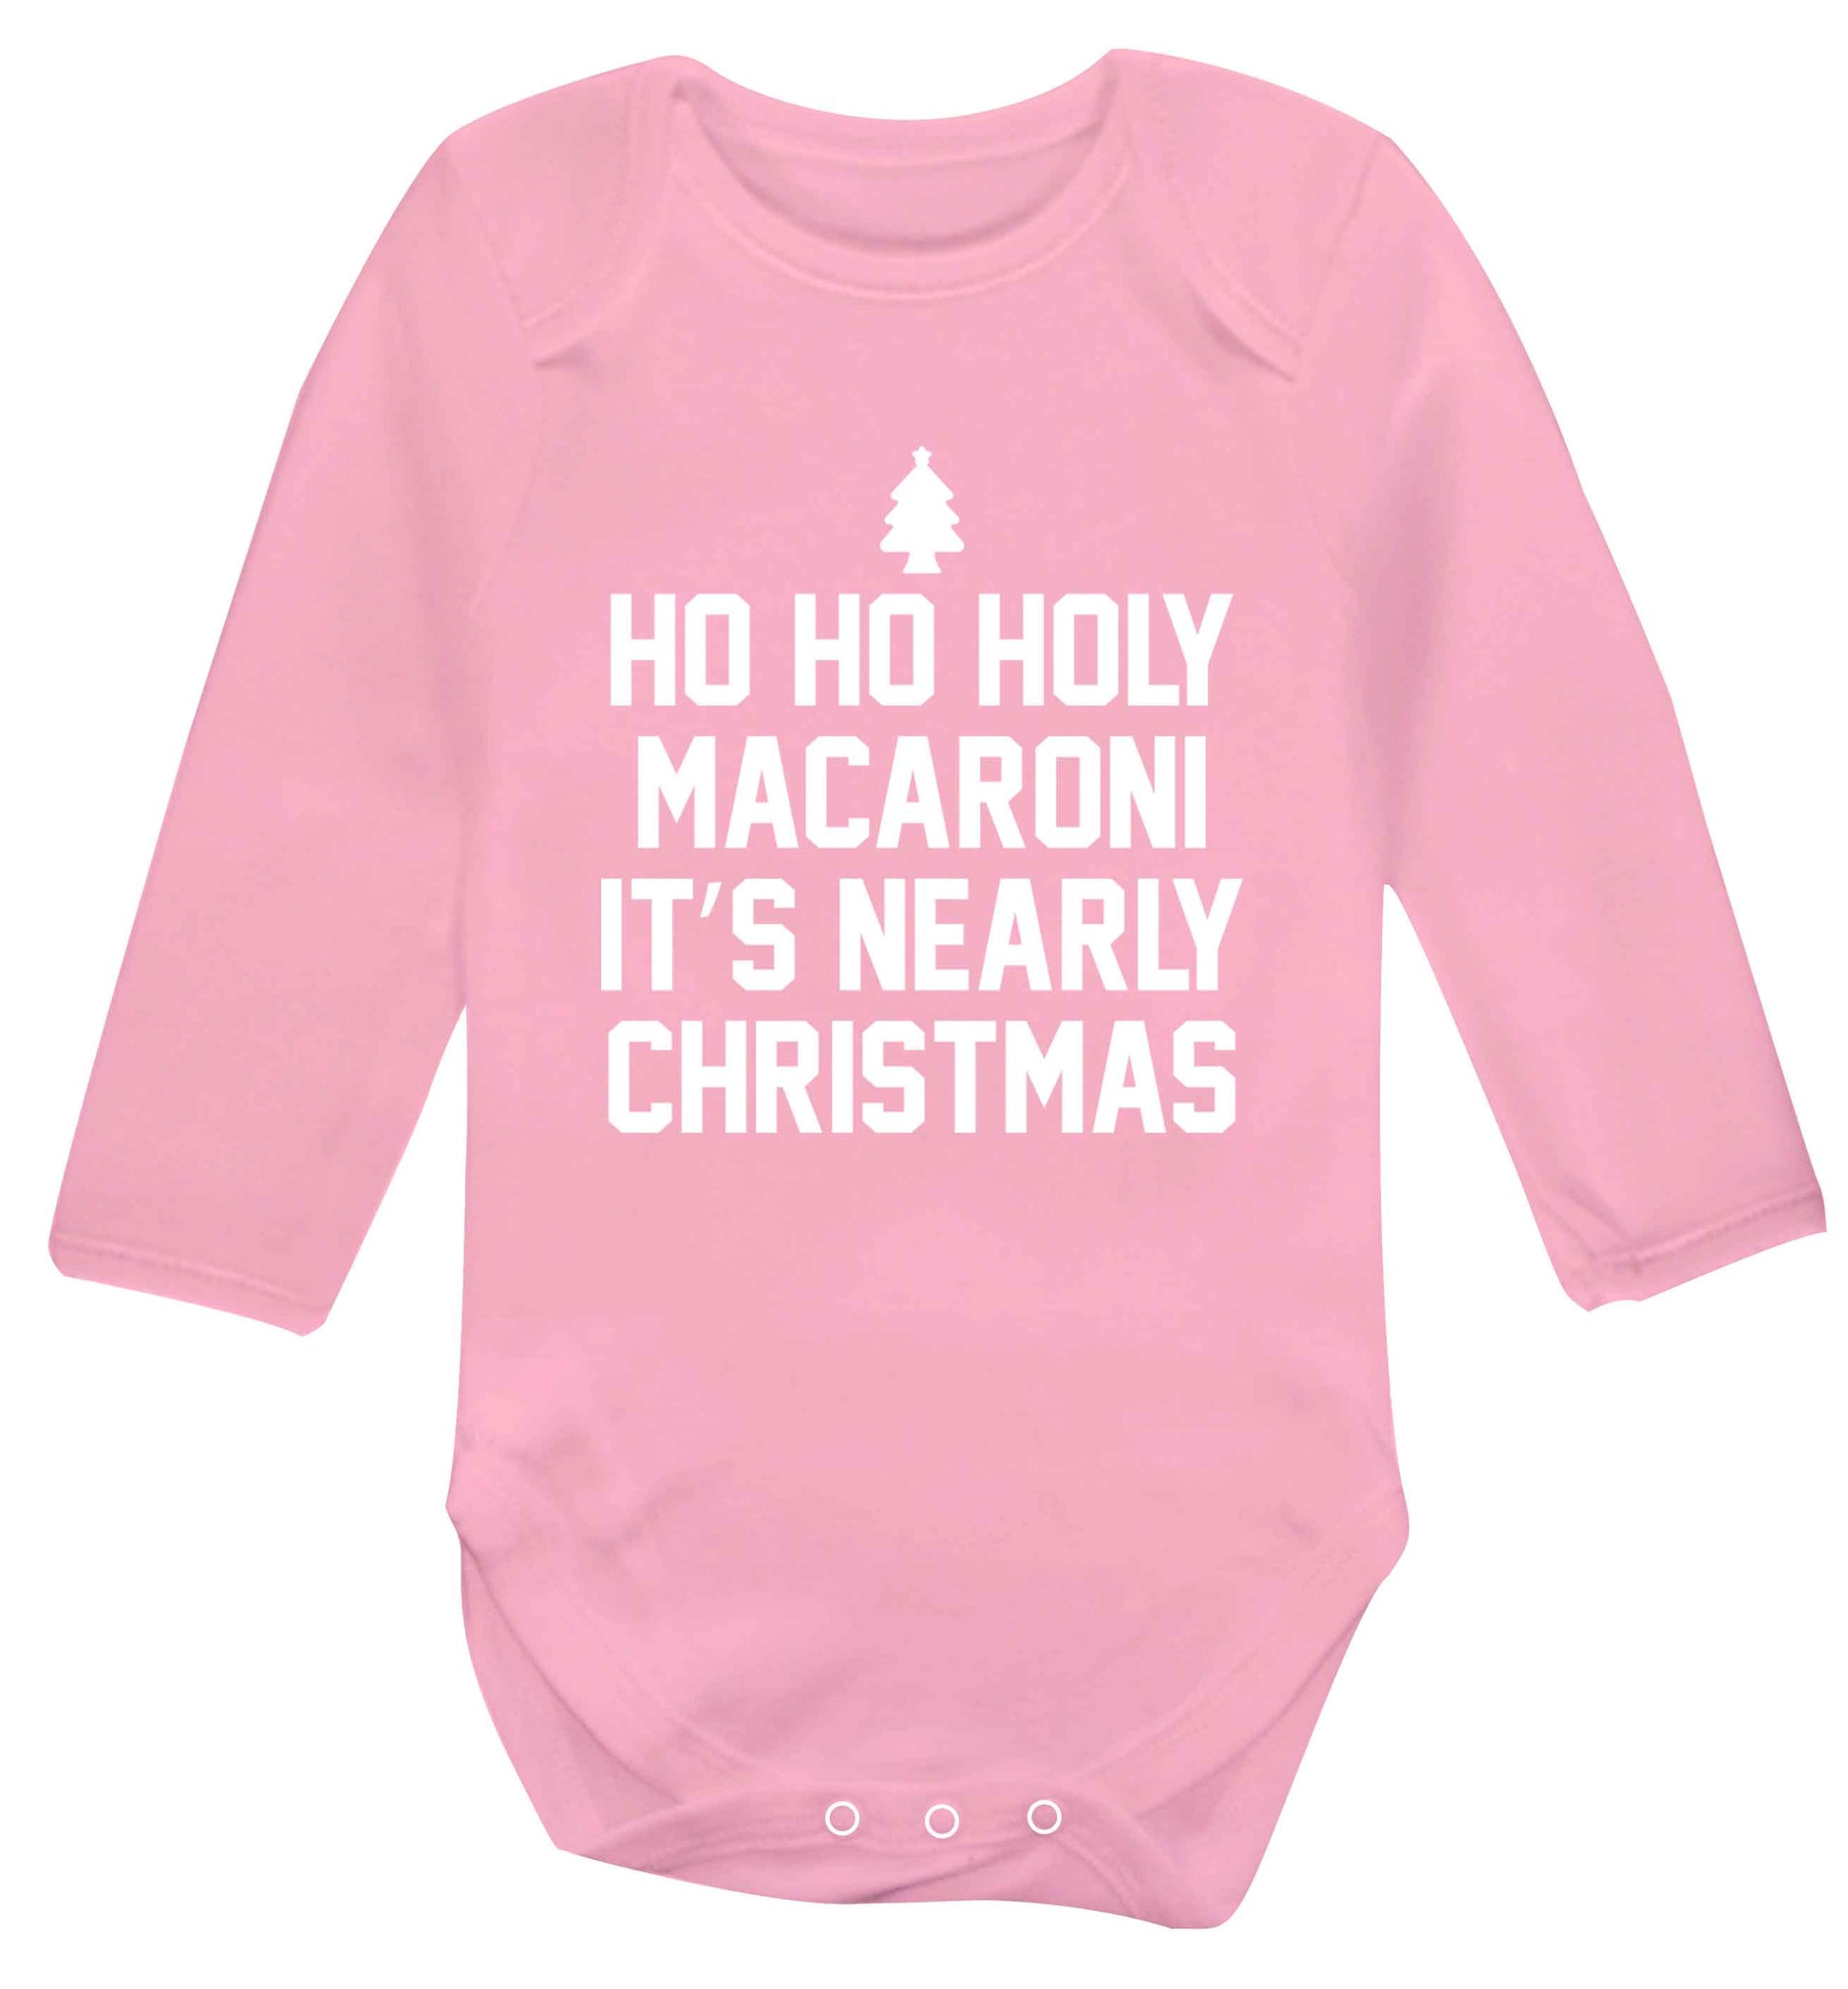 Ho ho holy macaroni it's nearly Christmas Baby Vest long sleeved pale pink 6-12 months